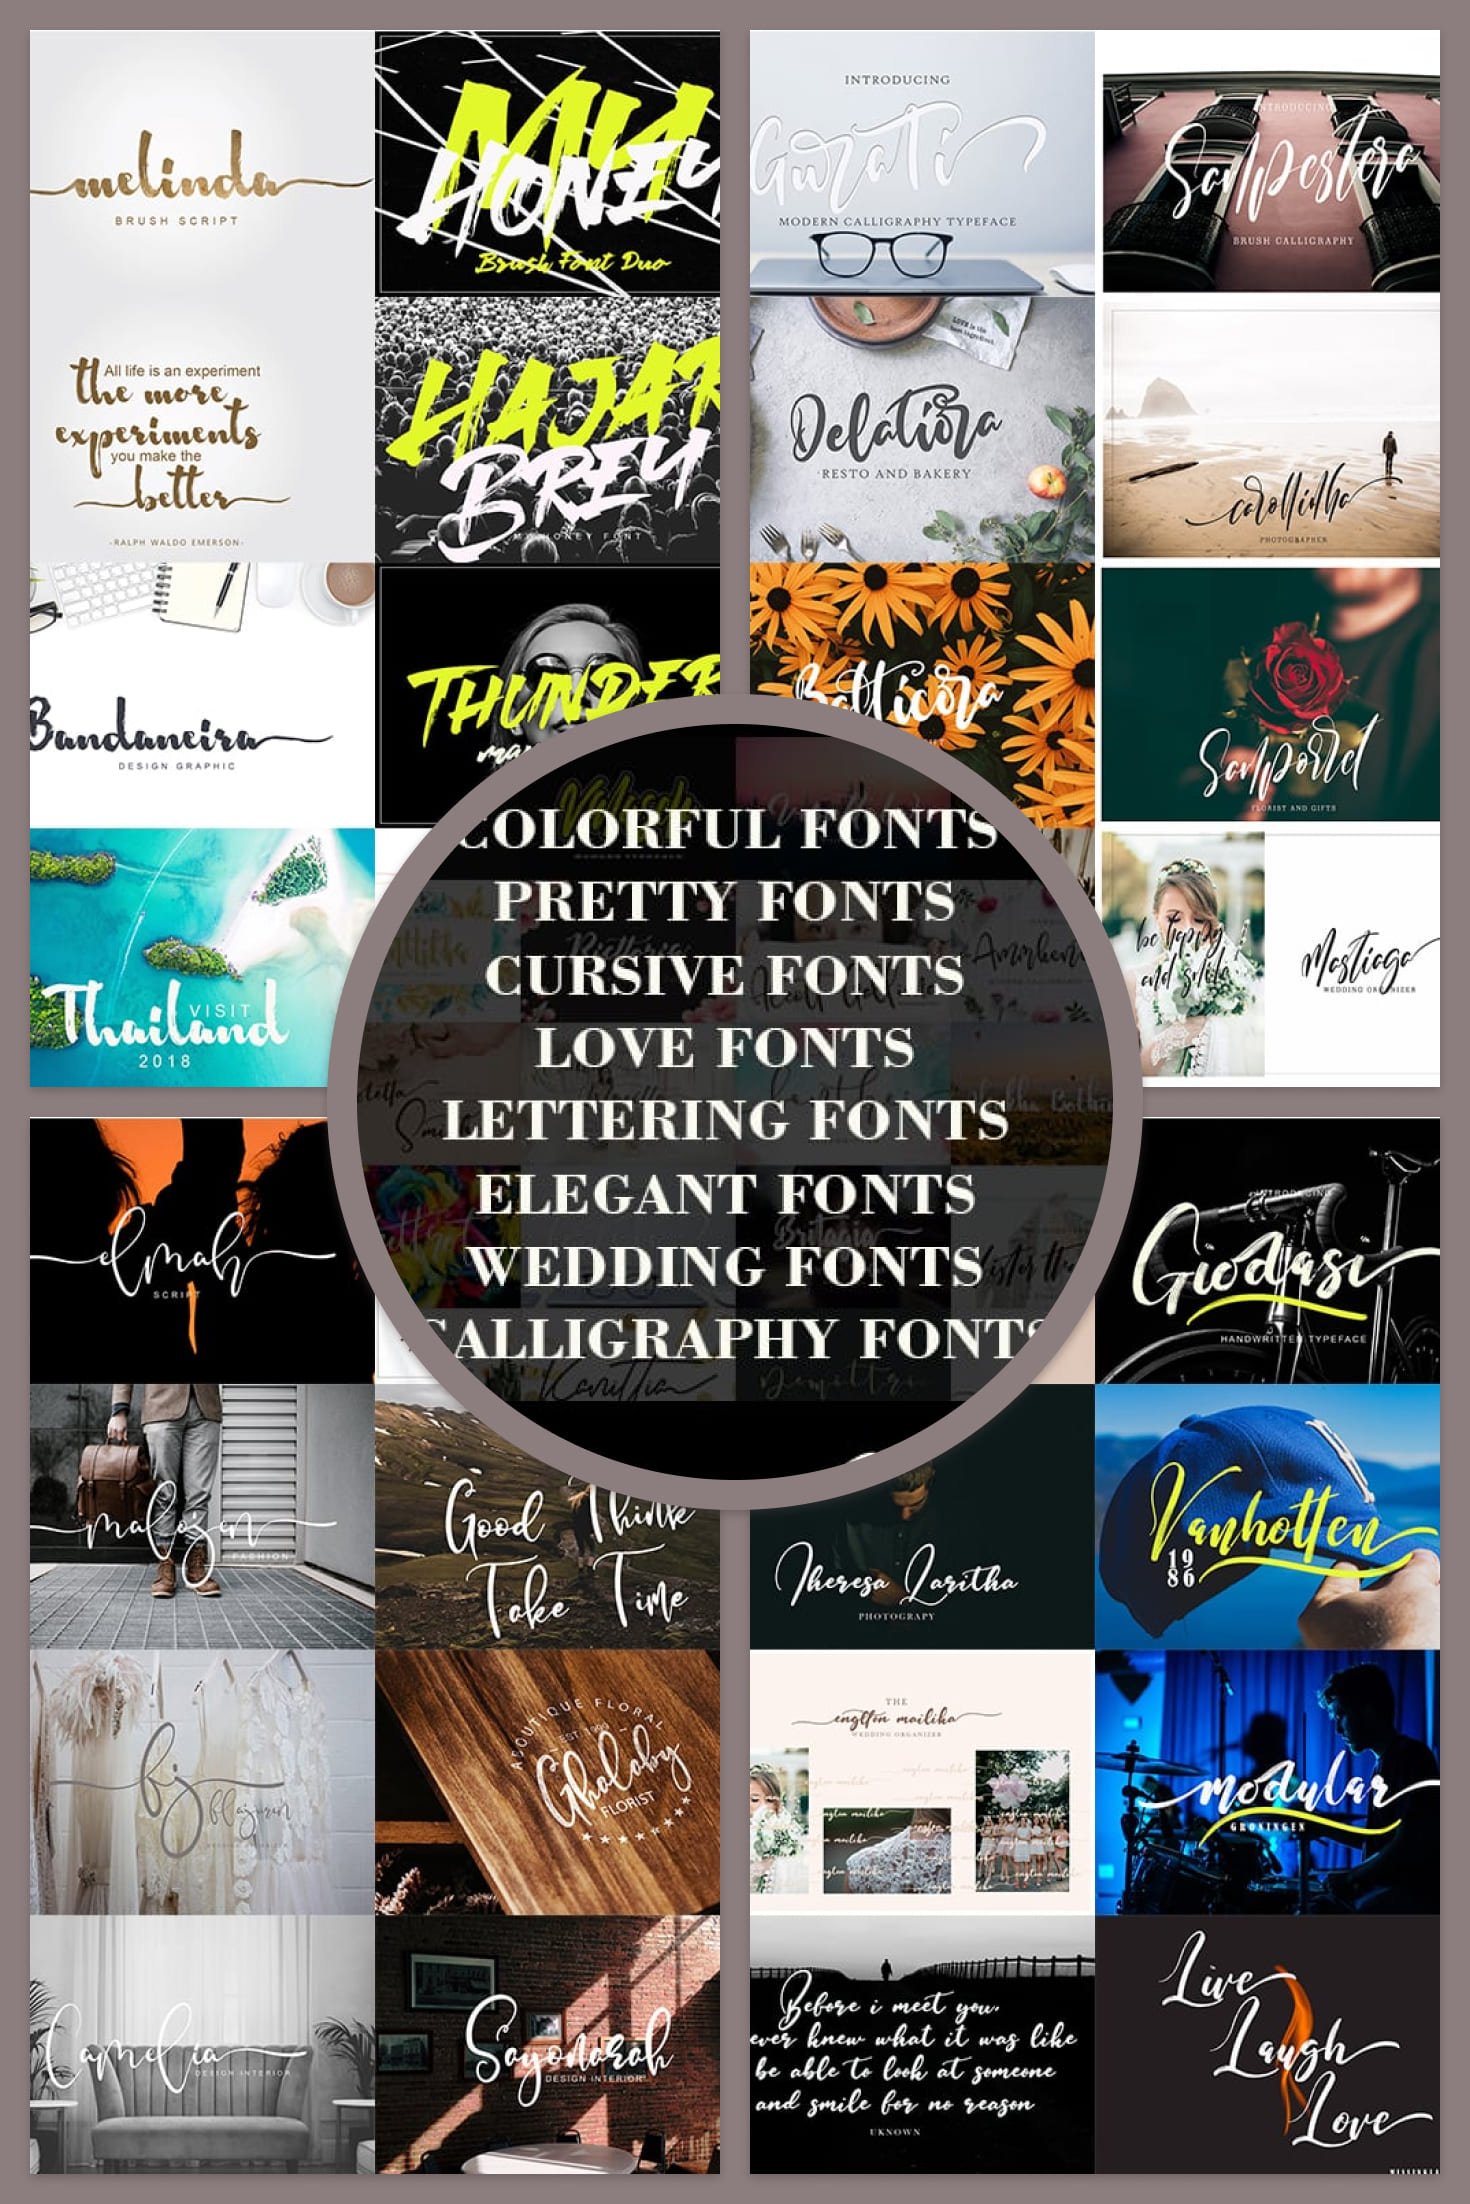 Stylish Calligraphy Fonts - 156 Fonts of 62 Typefaces. Collage Image.